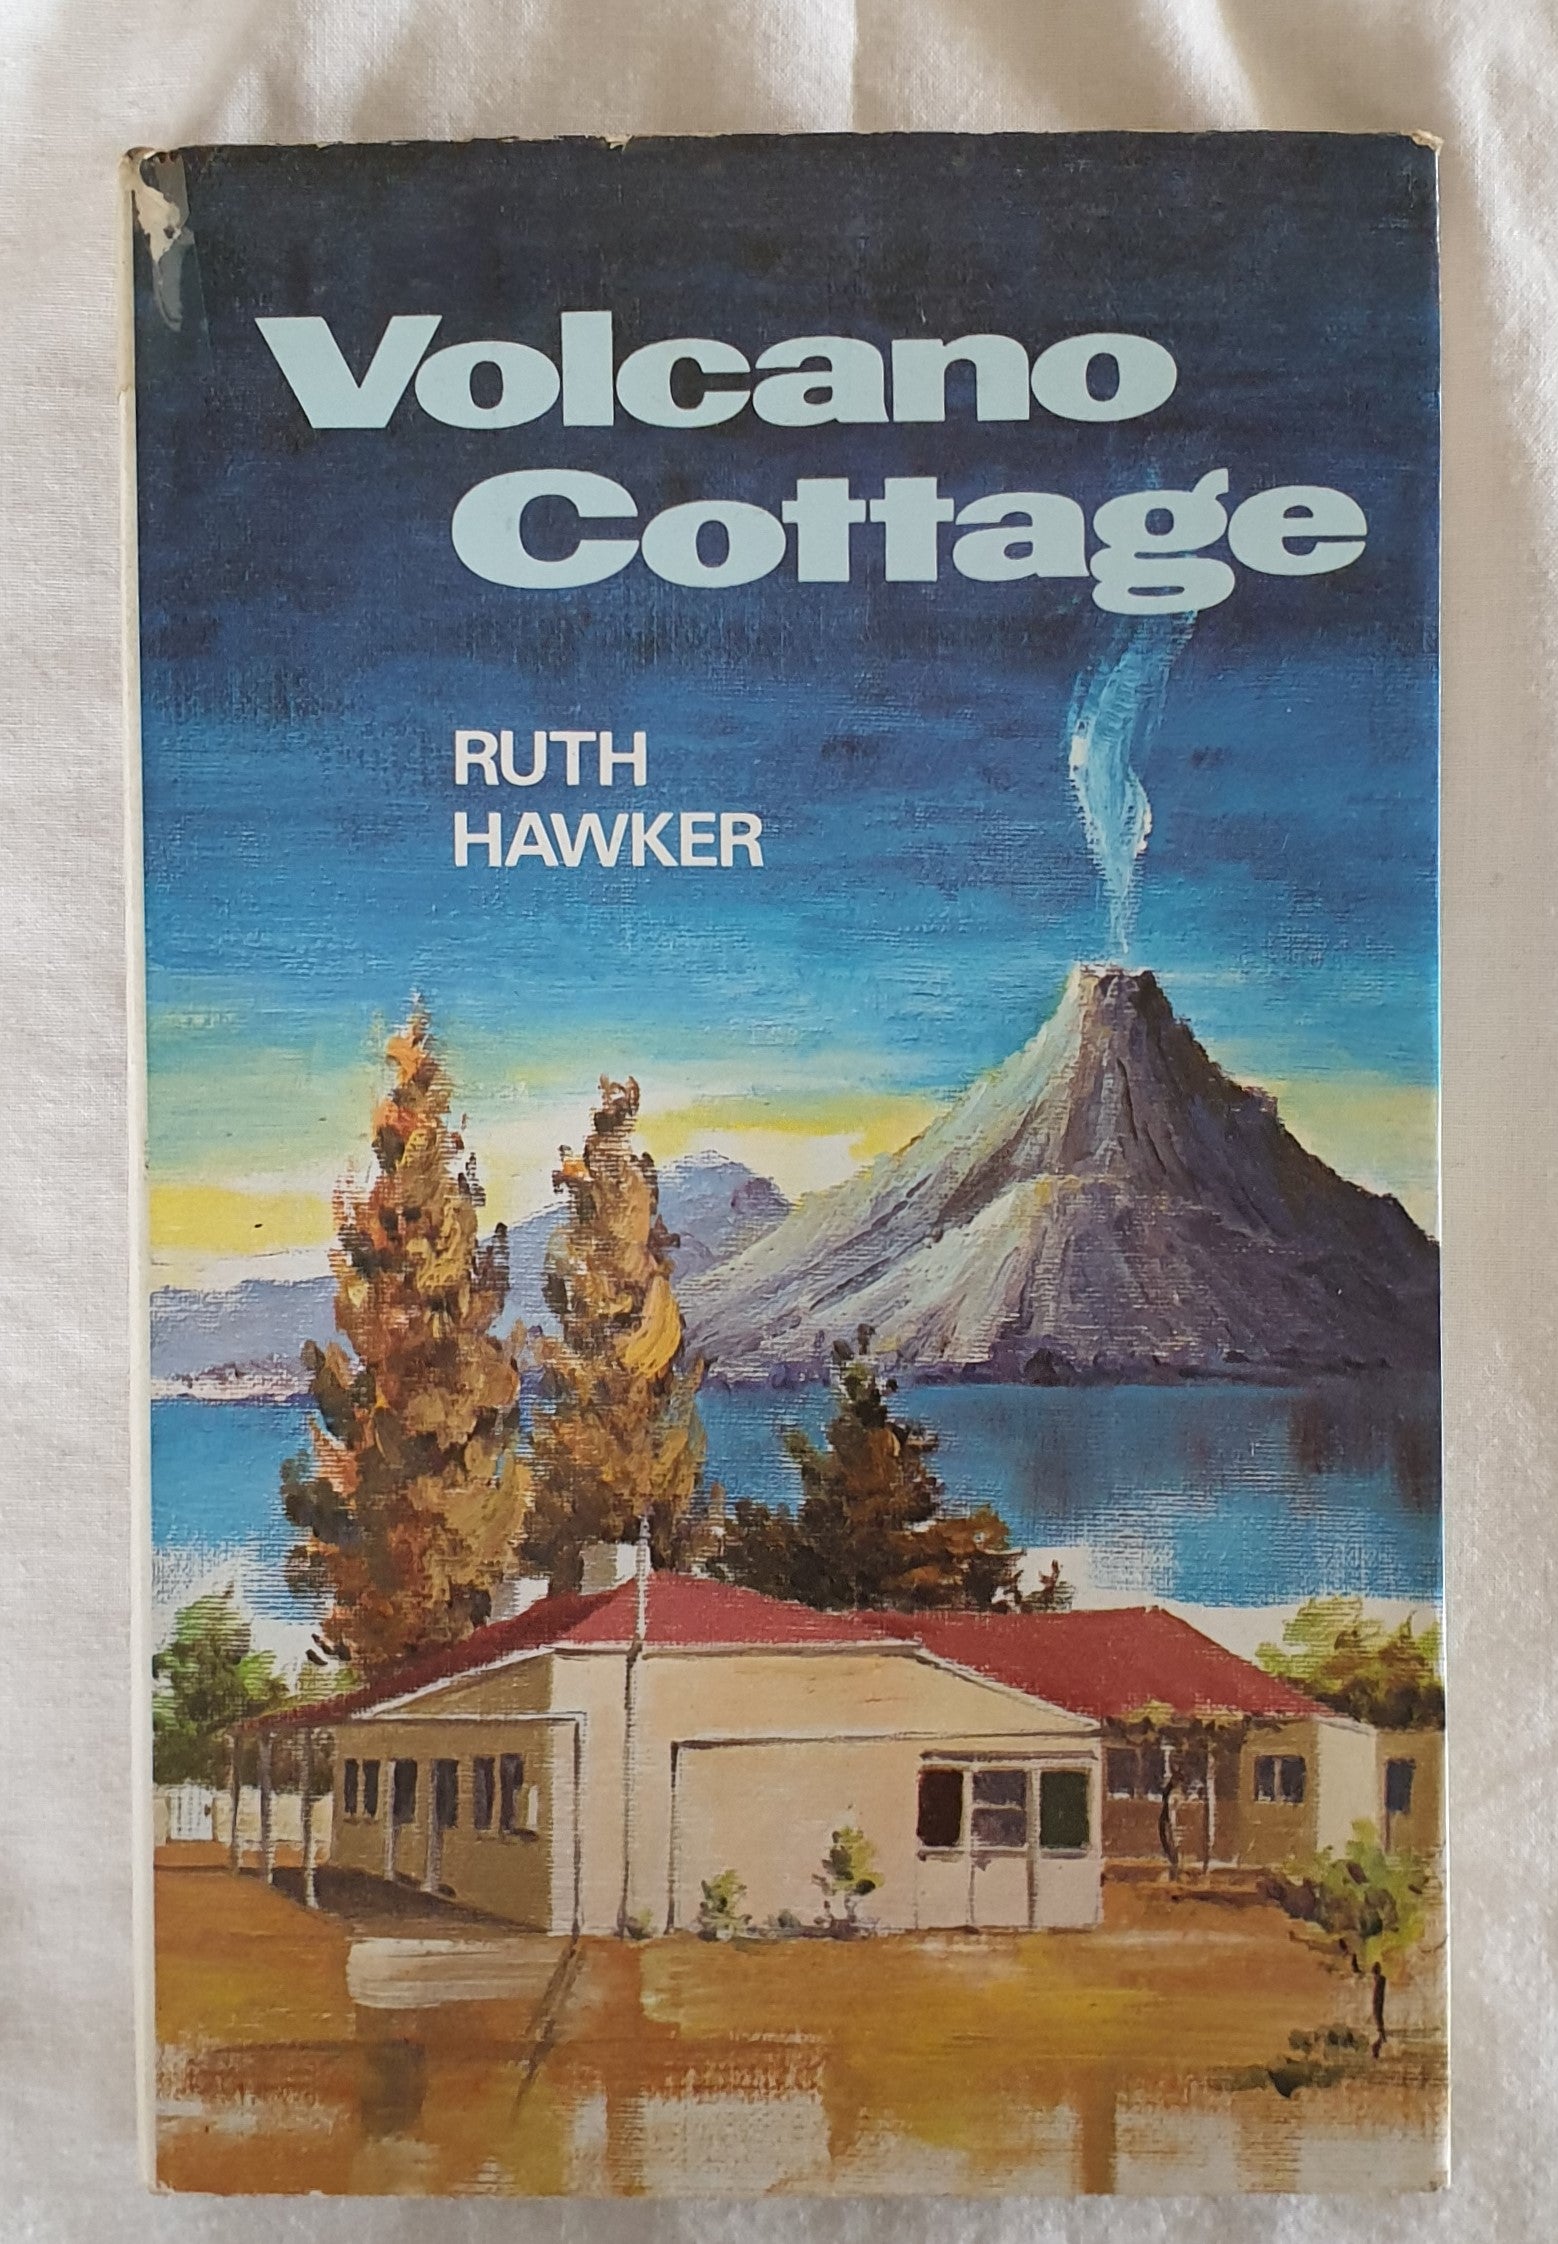 Volcano Cottage by Ruth Hawker